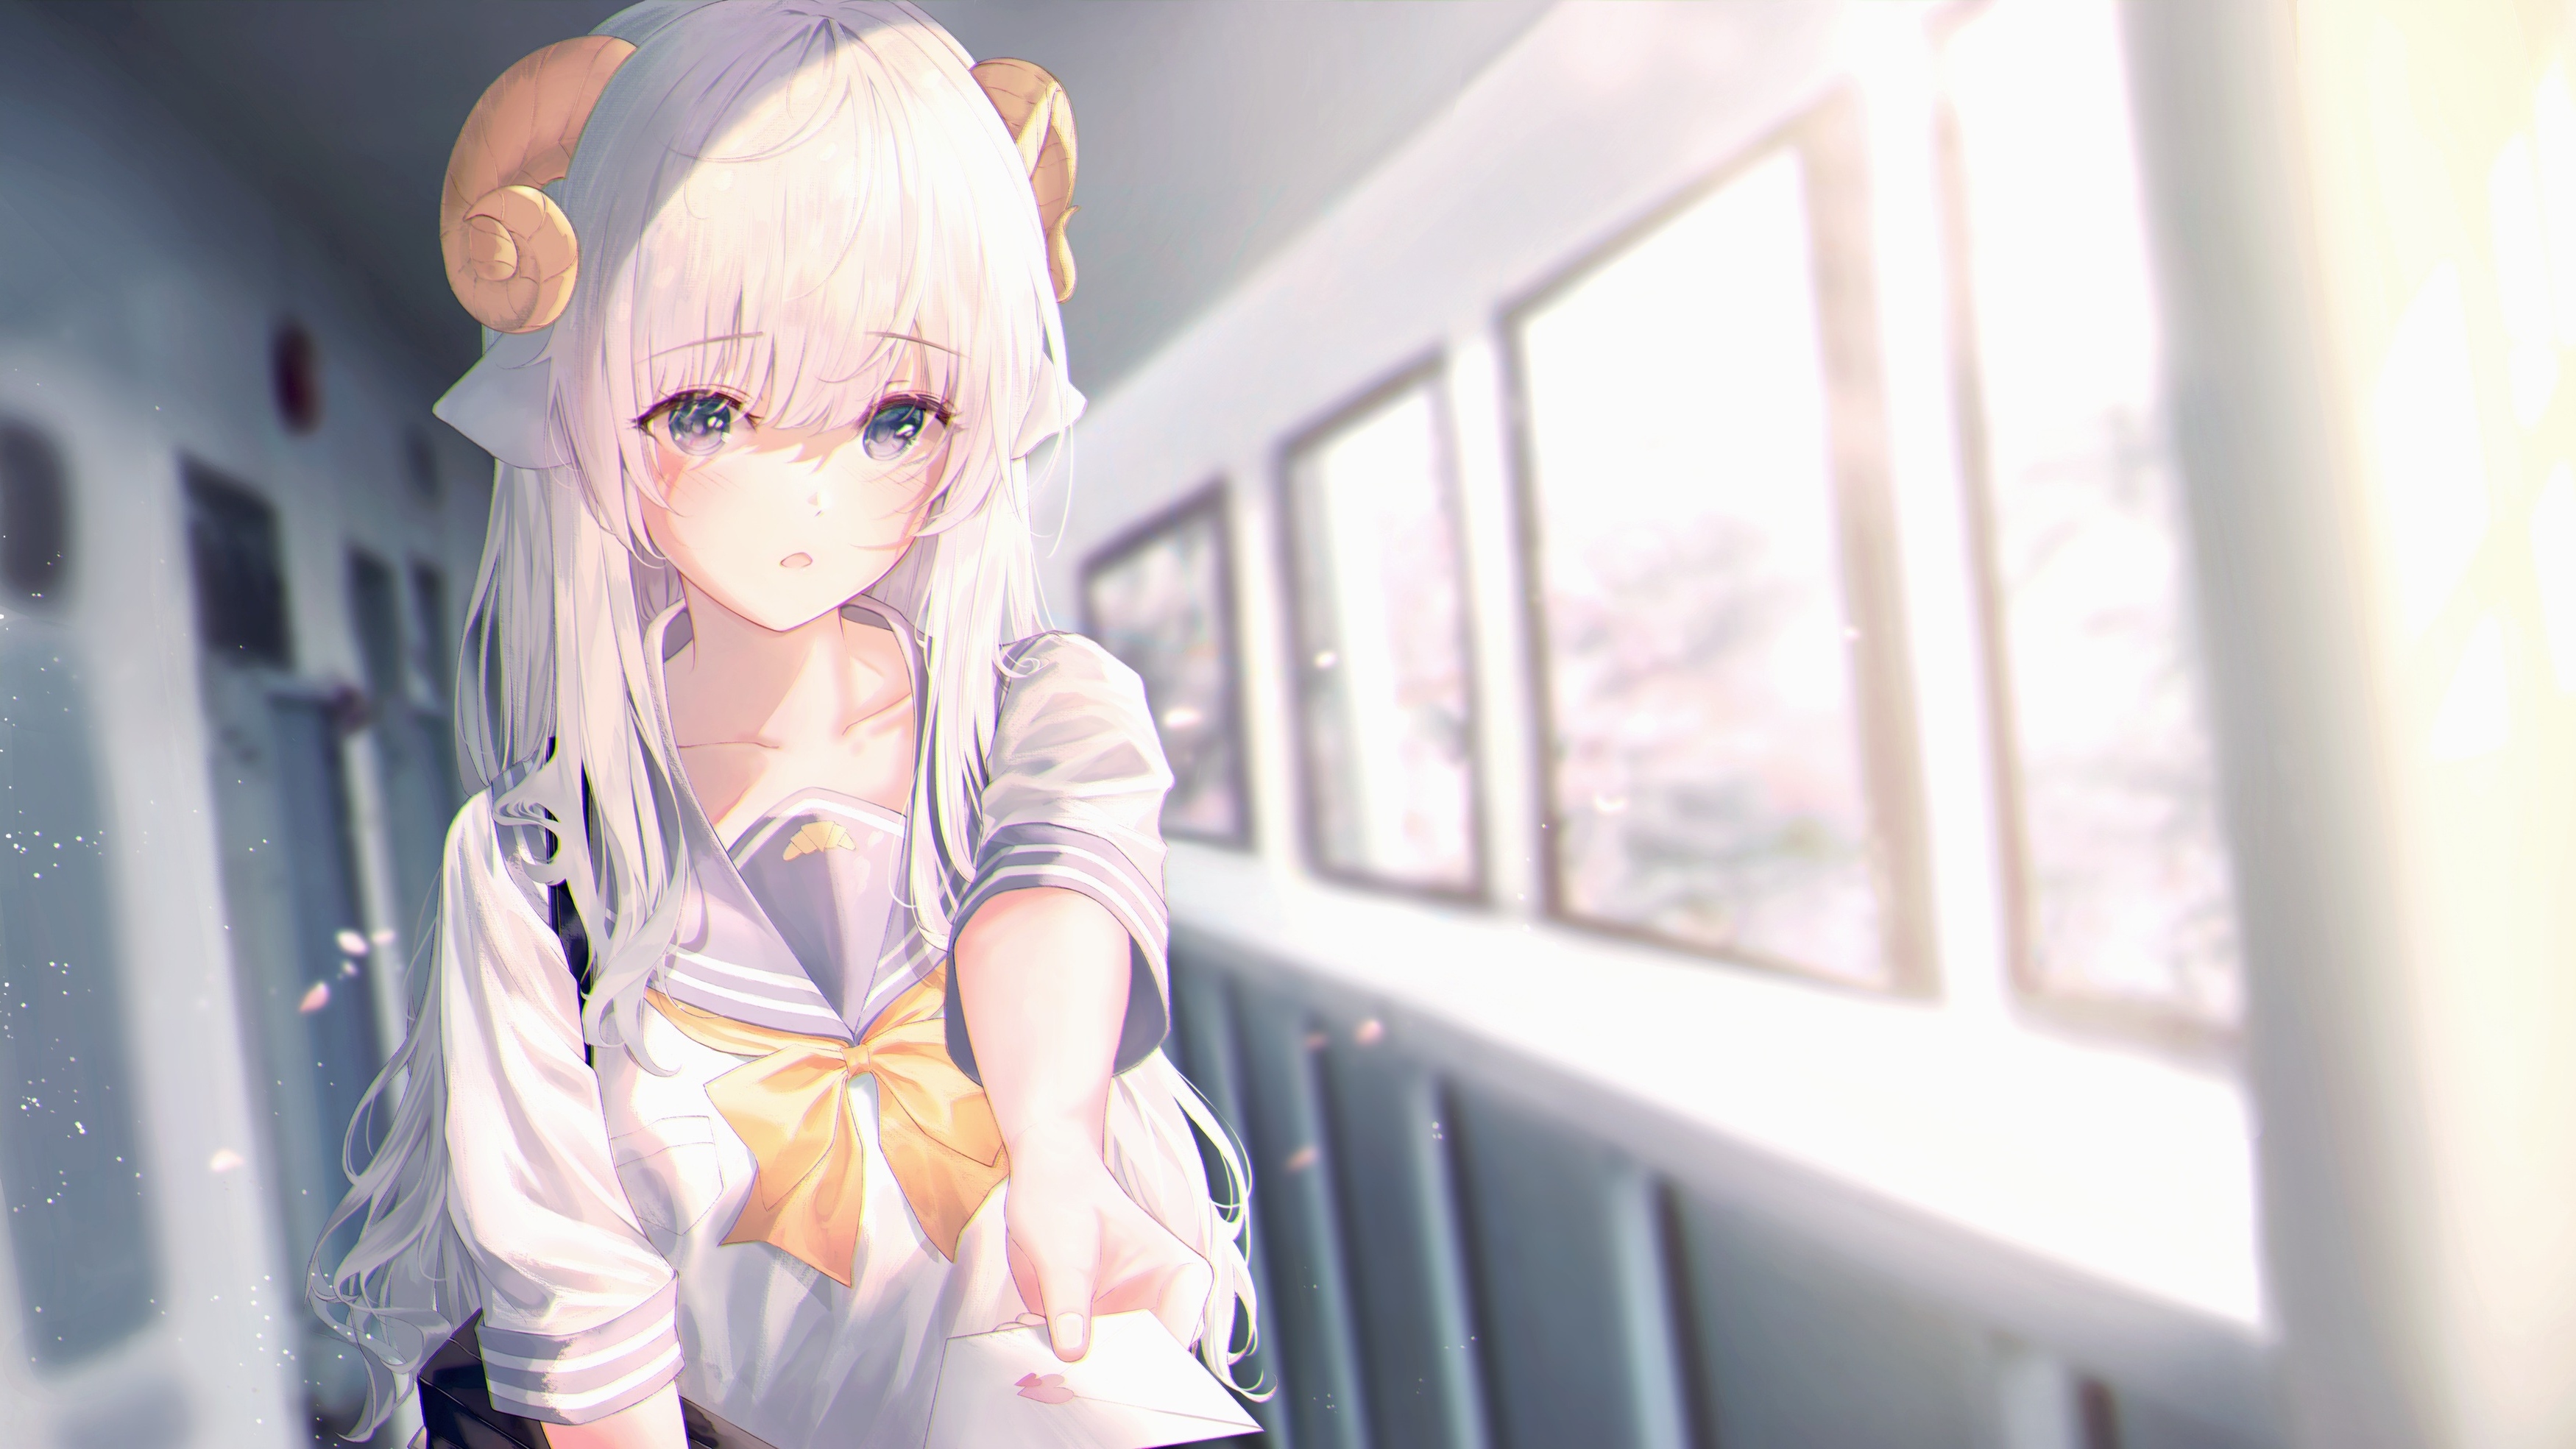 Anime Girl With White Hair Holding A White Feather And Looking At Buildings  Background, Picture Of Finland Background Image And Wallpaper for Free  Download